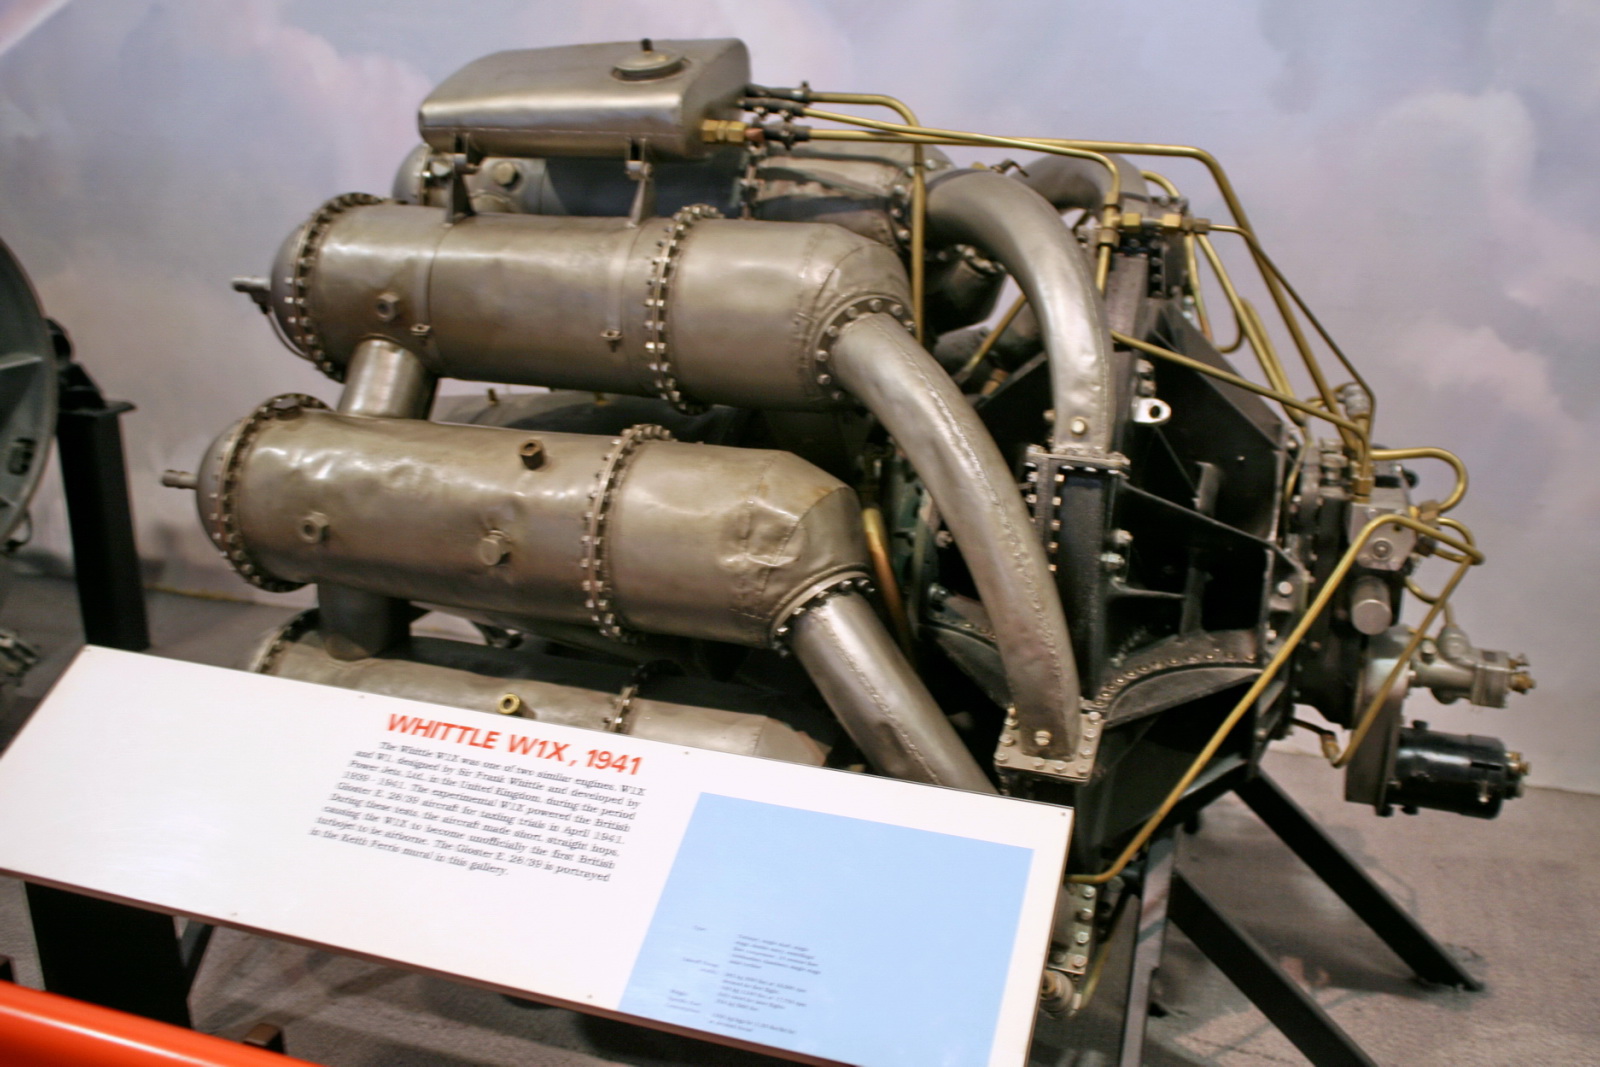 an engine with multiple parts on display on the ground